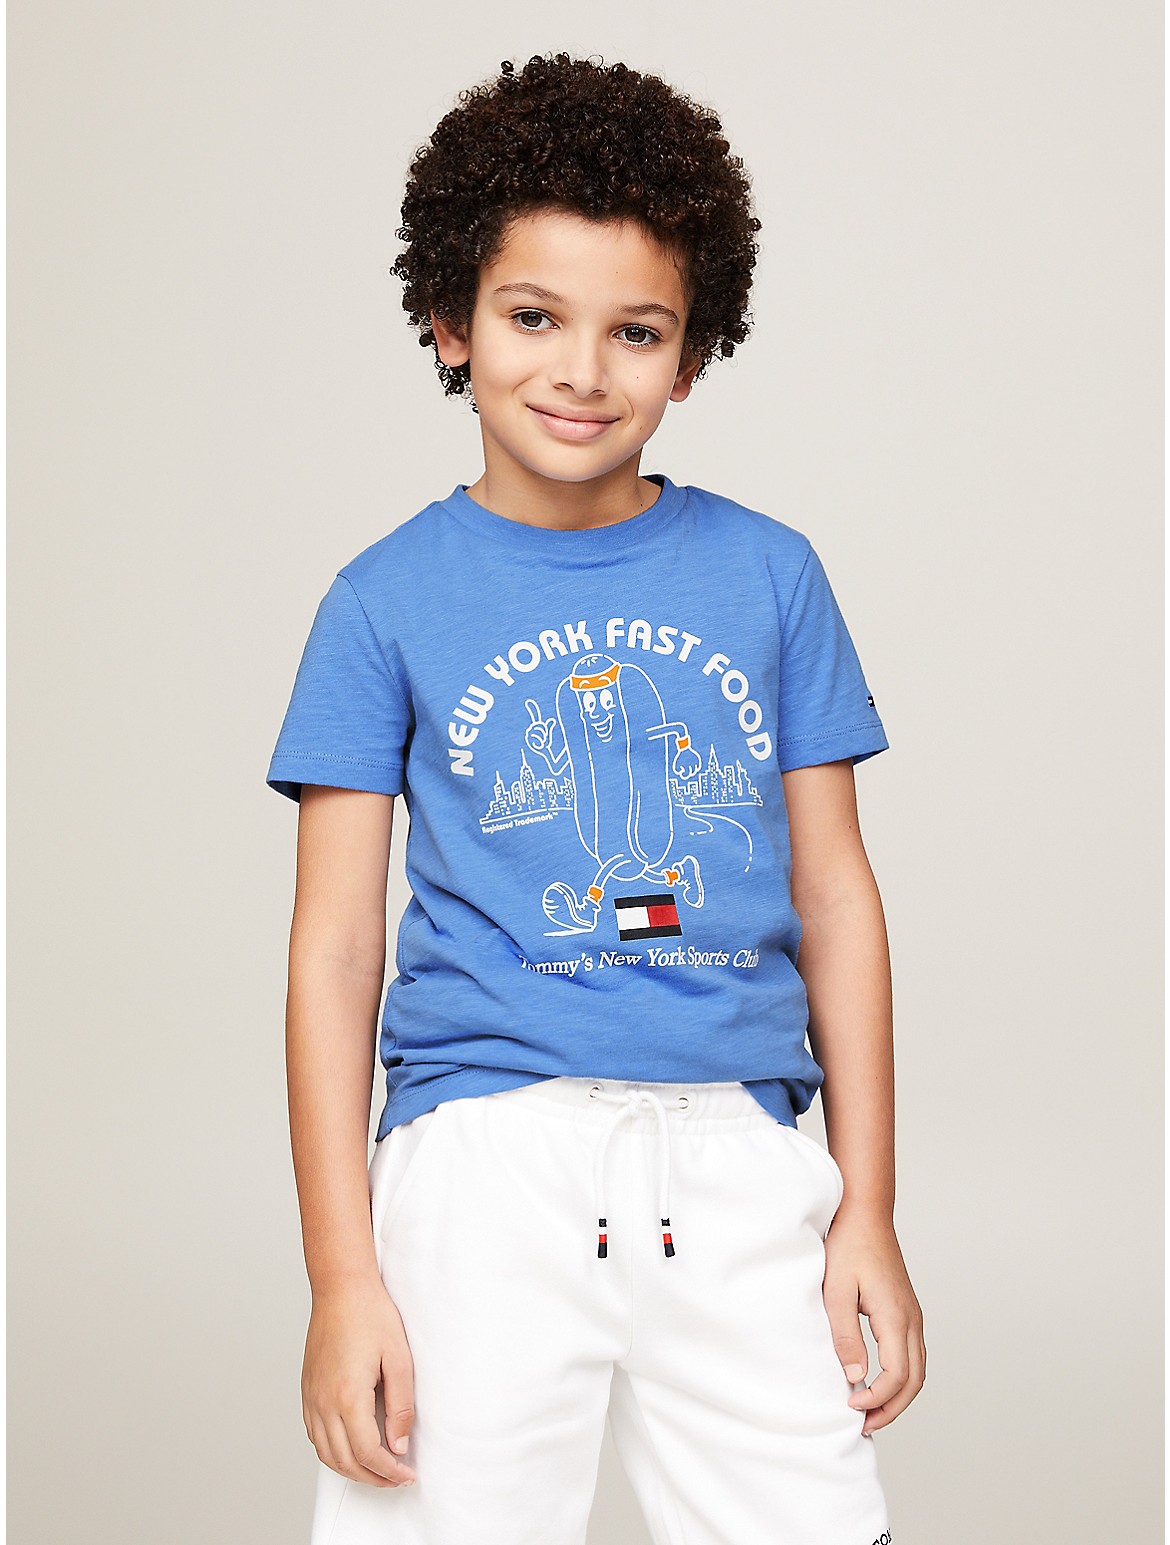 Tommy Hilfiger Boys' Kids' On-The-Go Graphic T-Shirt